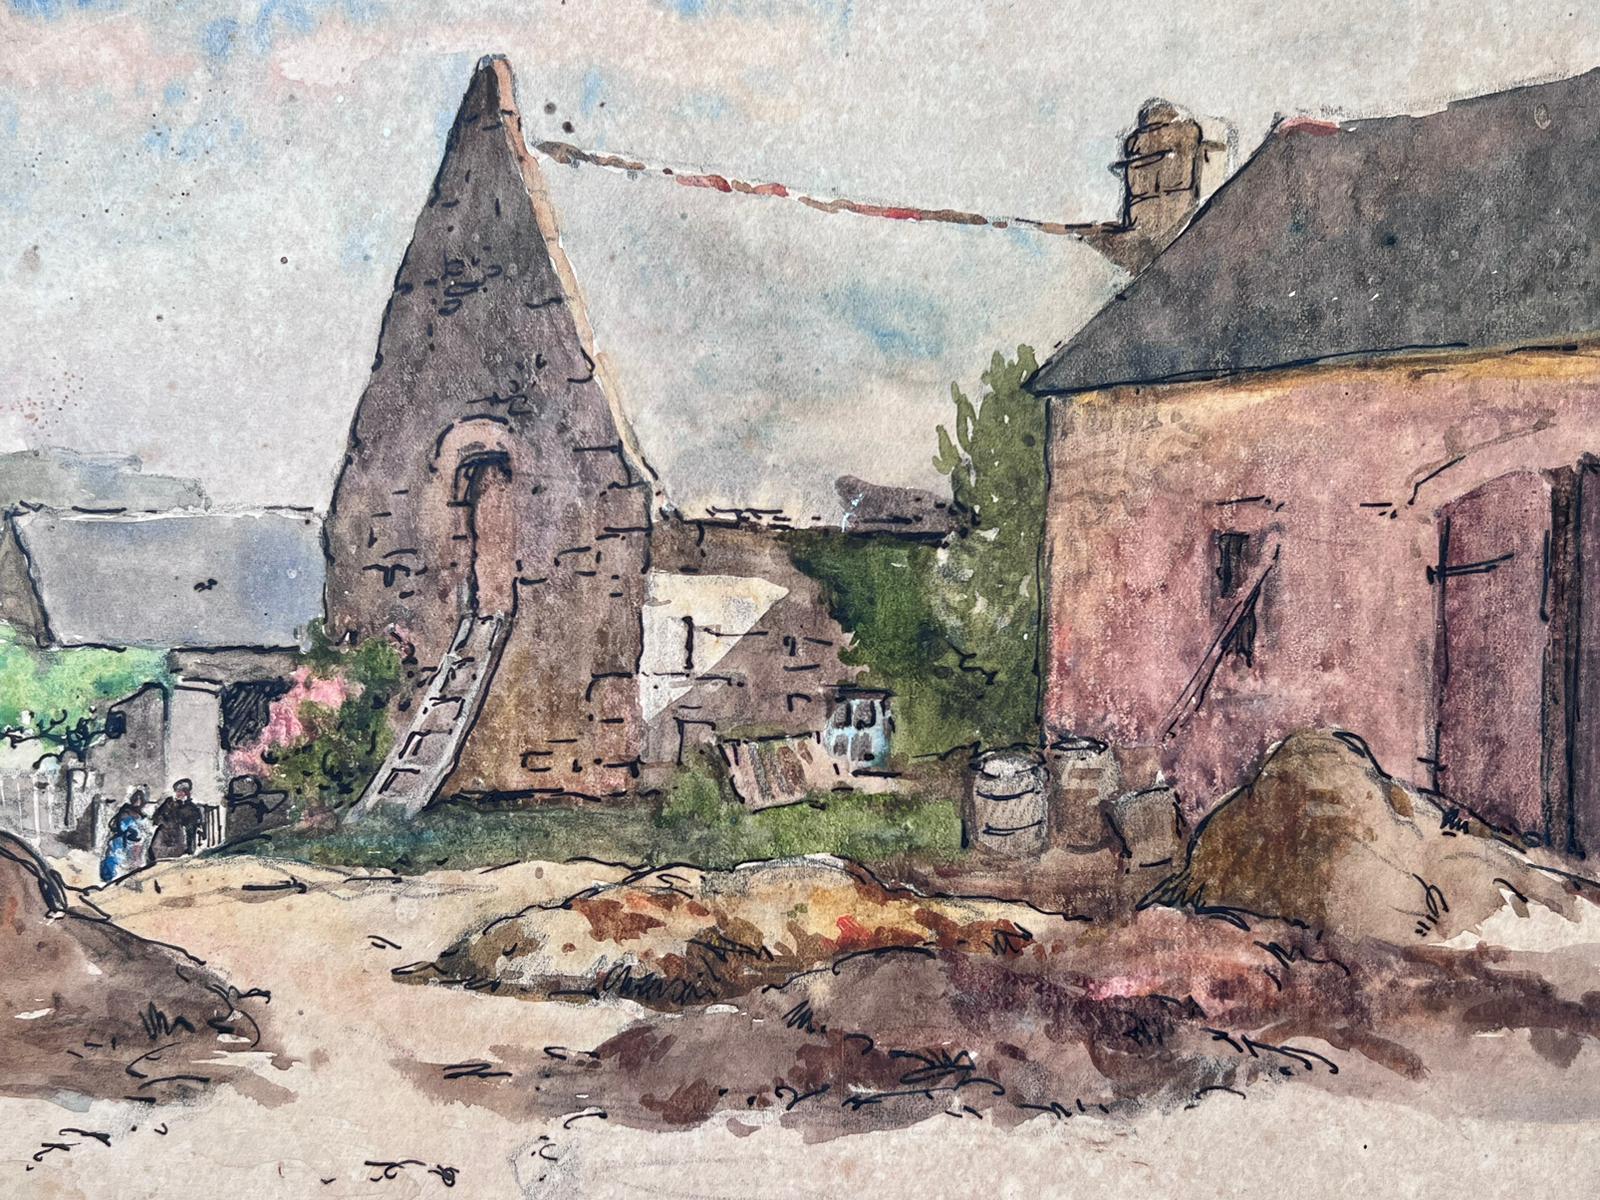 Jean La Forgue (French 1901-1975)  watercolour on card, unframed
painting: 8 x 10 inches
provenance: the artists estate, France
condition: very good and sound condition; there are minor age related marks and stains to the surface simply caused by